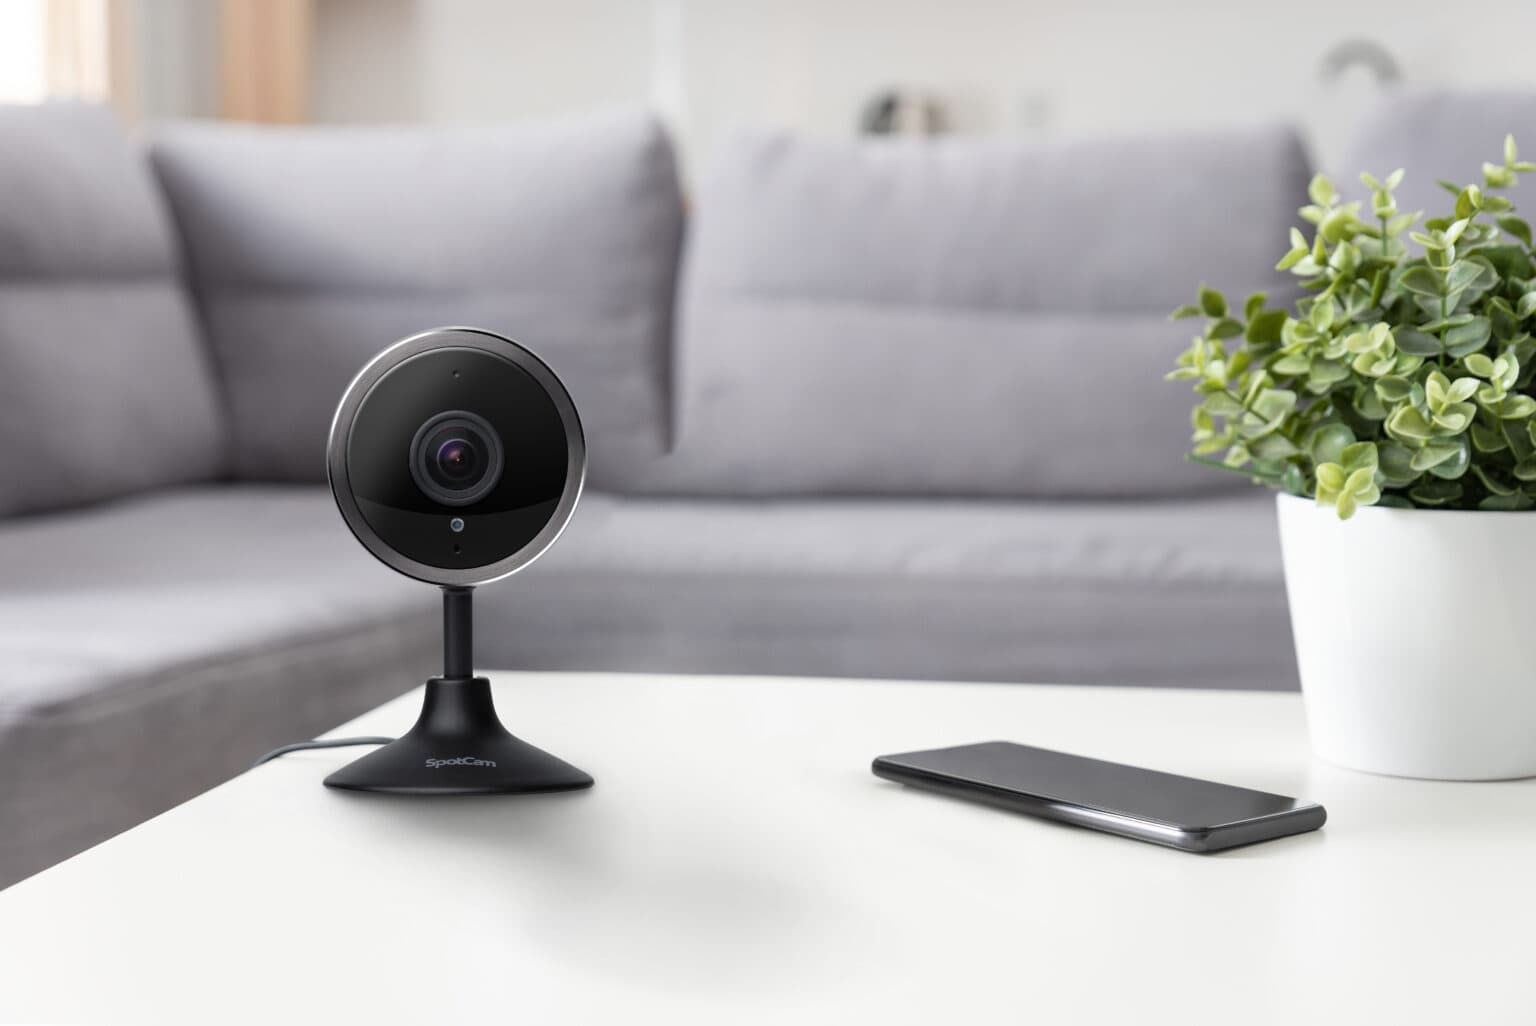 The SpotCam Pano 2 AI security camera offers full-time continuous cloud recording -- forever.